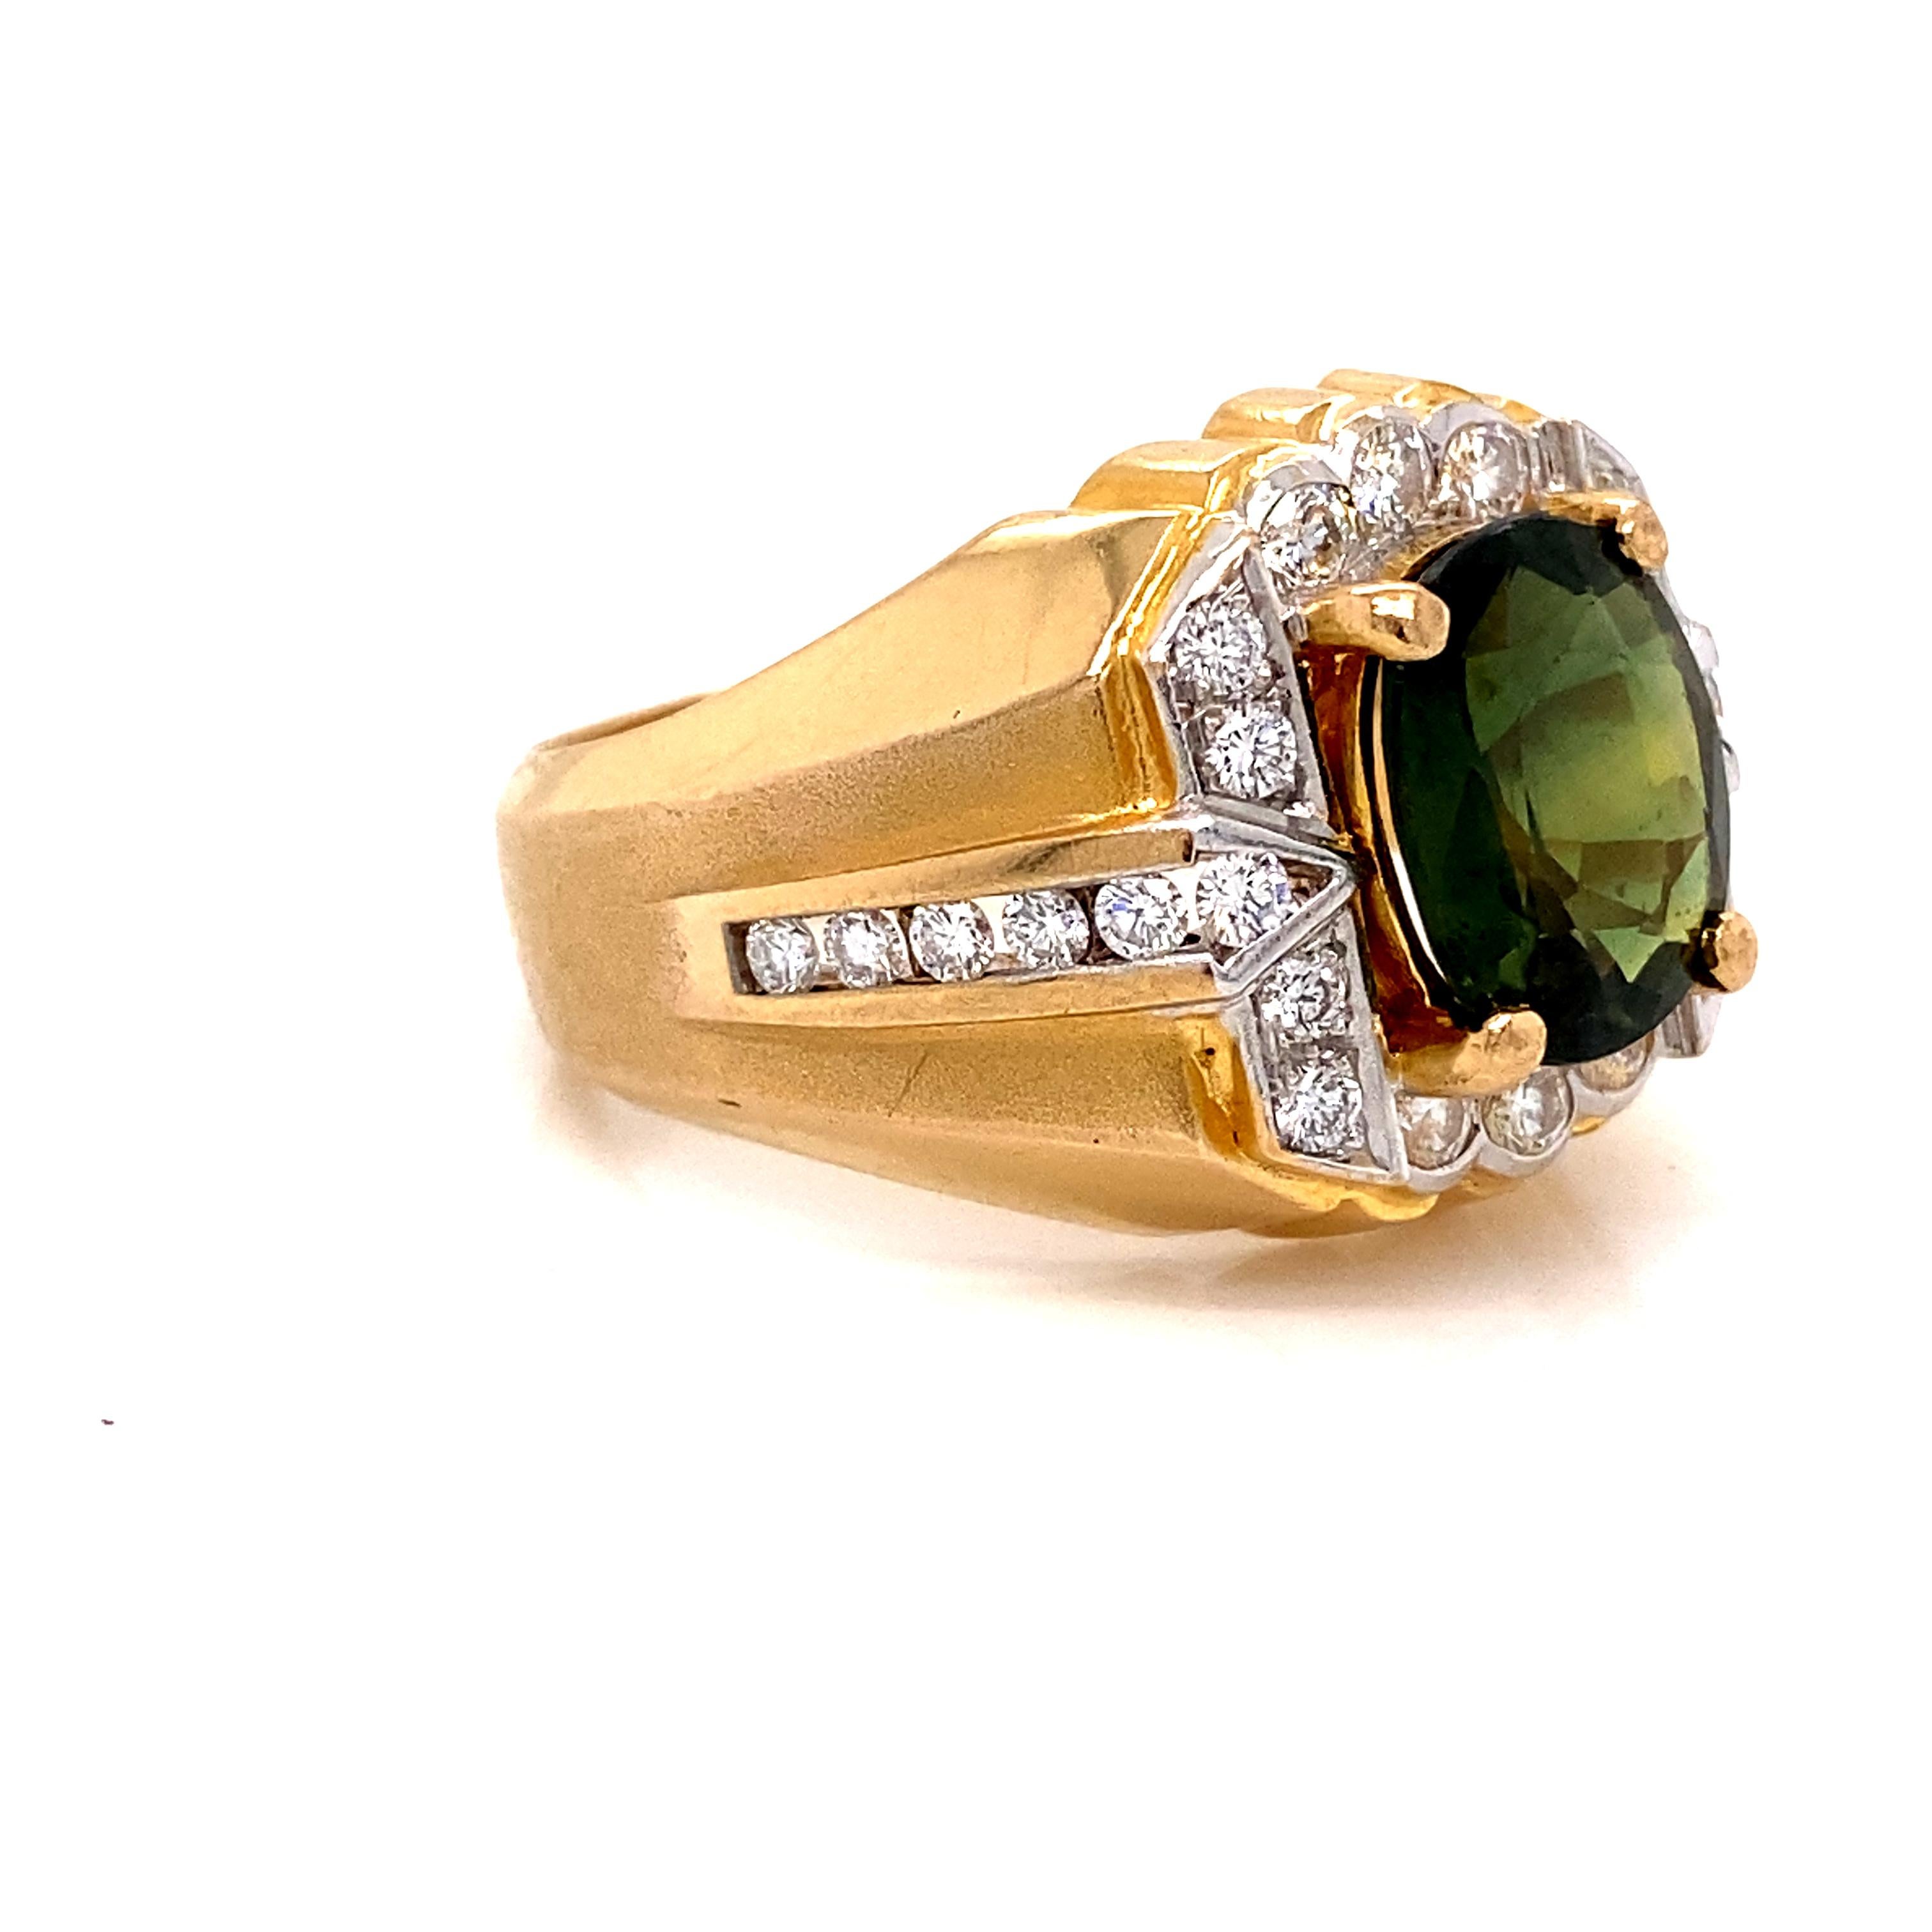 An incredible green sapphire resting among round brilliant diamonds in a bold 18k yellow gold ring. The sapphire weighs approximately 3.83 carats. The diamonds are G-H color and VS2-SI1 clarity. Together, the diamonds weigh approximately 0.82 ctw.